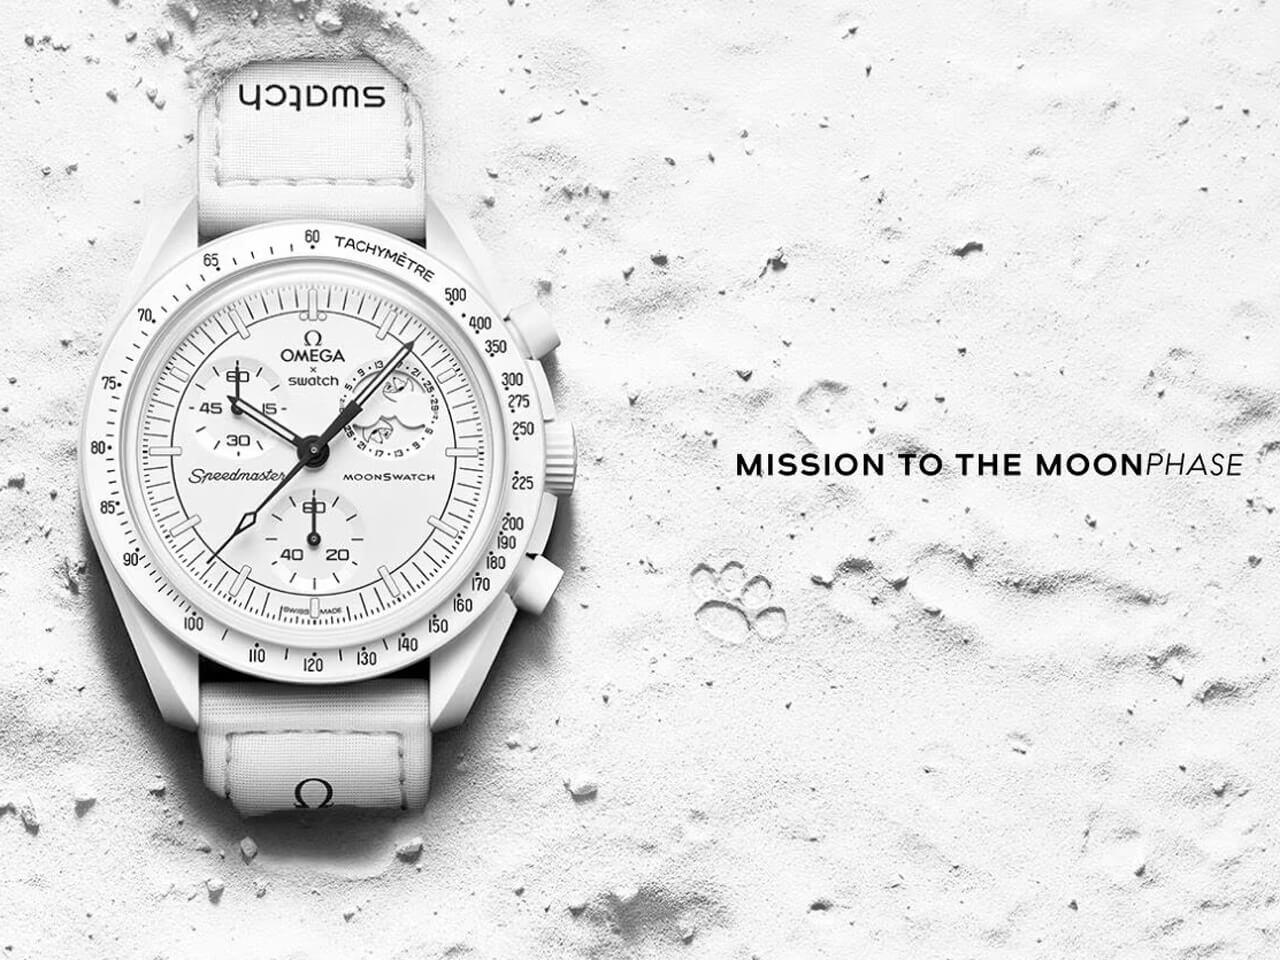 Bioceramic MoonSwatch MISSION TO THE MOONPHASEとは？